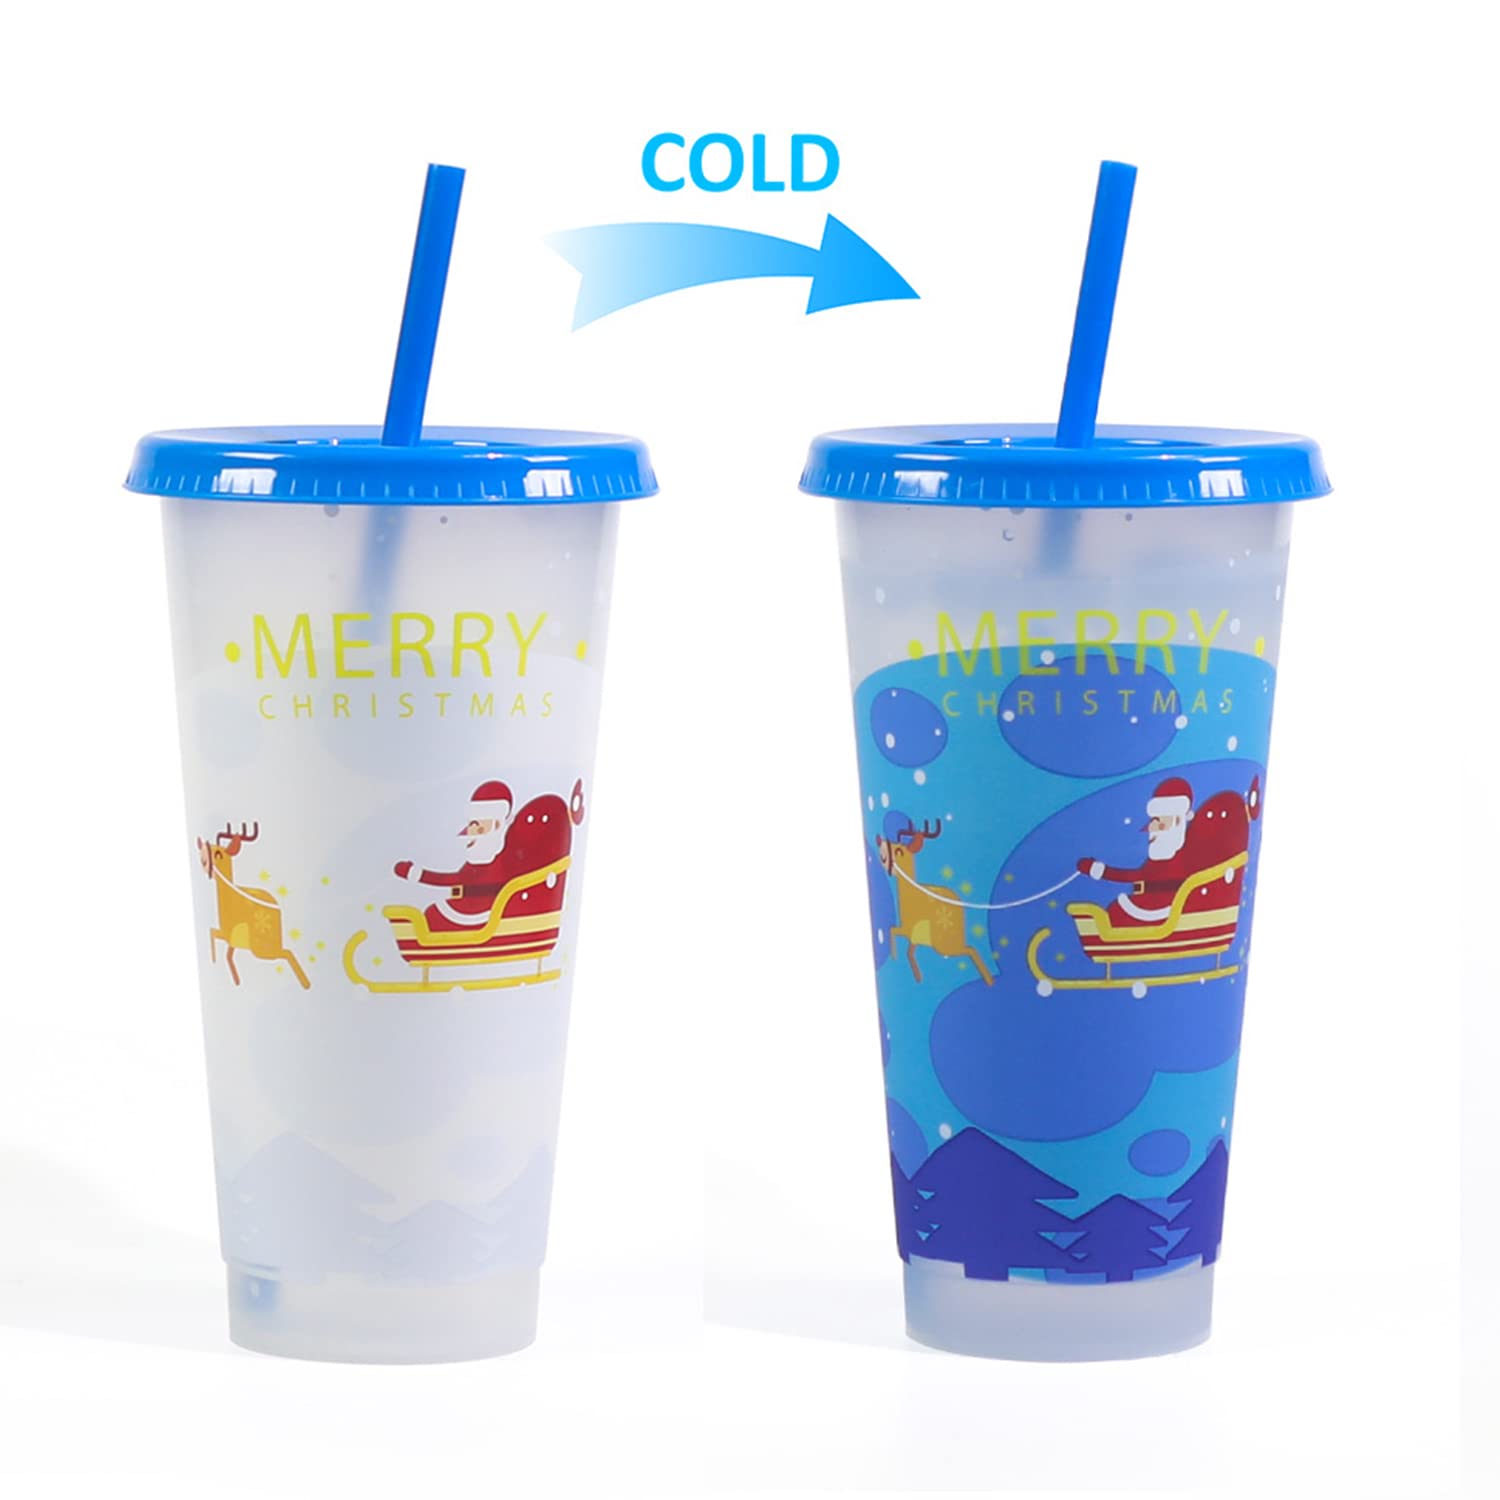 Plastic Cup Christmas Coffee - 5pcs Water Bottles Straw Plastic